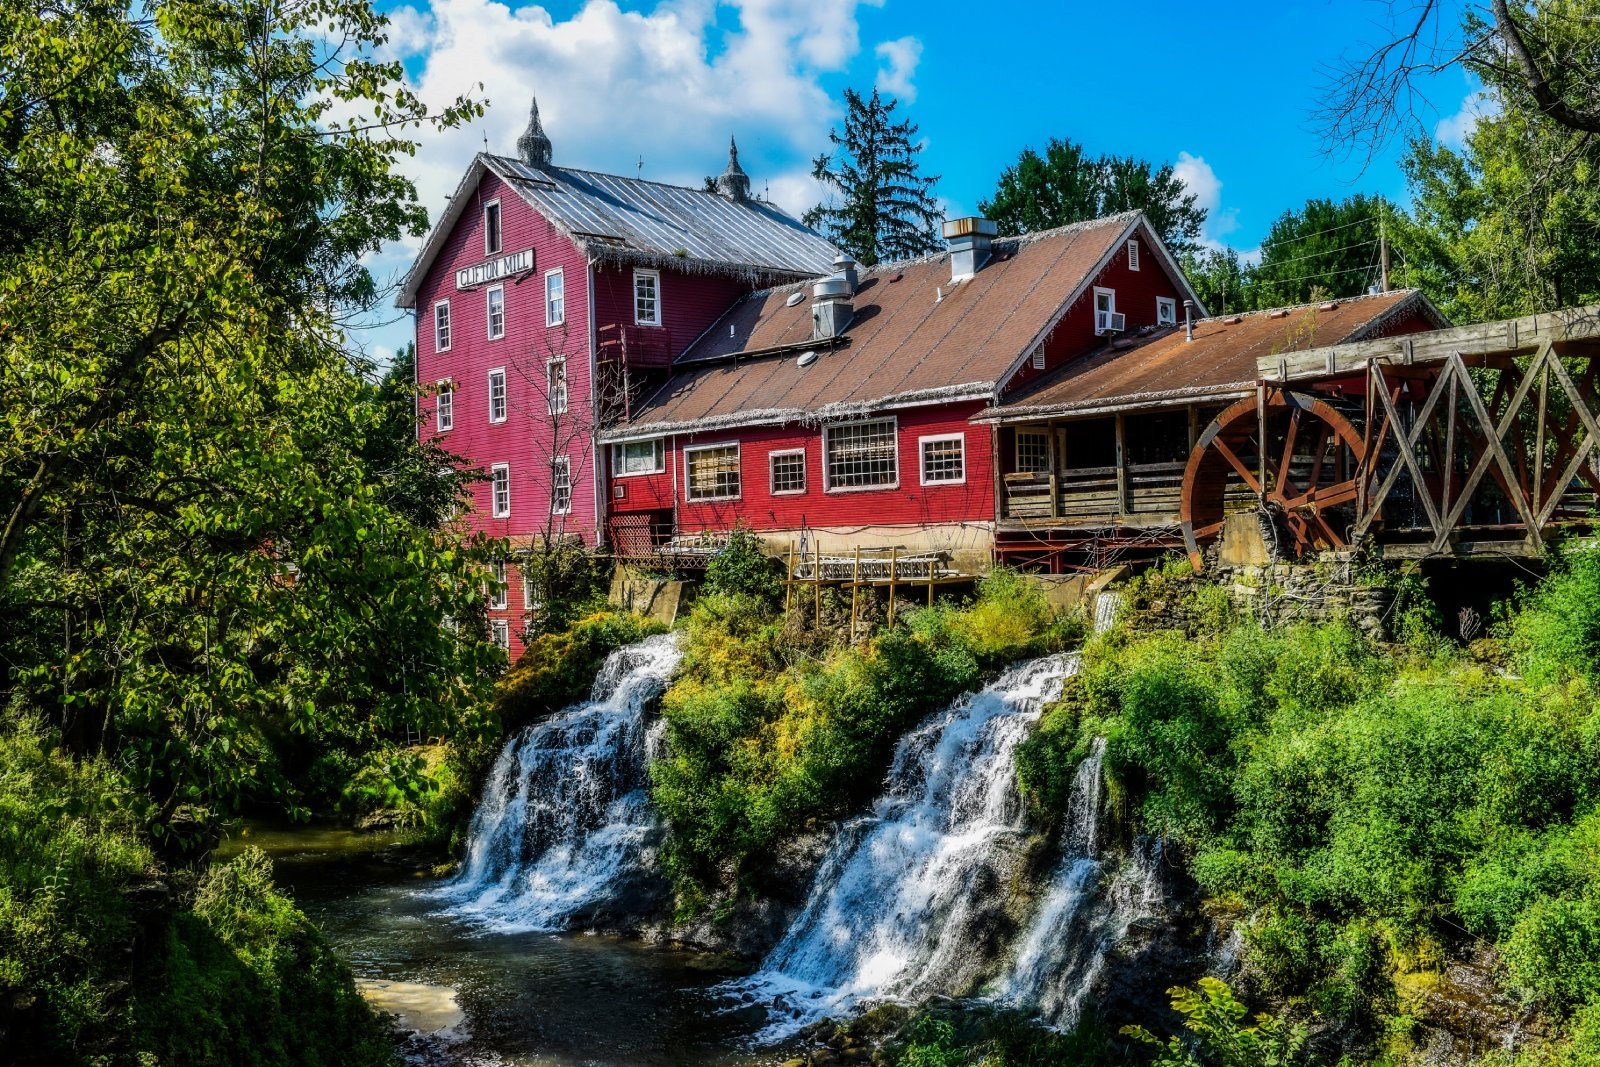 Image Credit: Shutterstock / Craig Miller Photography <p>This vibrant, artsy village invites slow walkers and deep thinkers to enjoy its laid-back vibe and creative community. It’s a place where your dollar—and your day—extends further.</p>